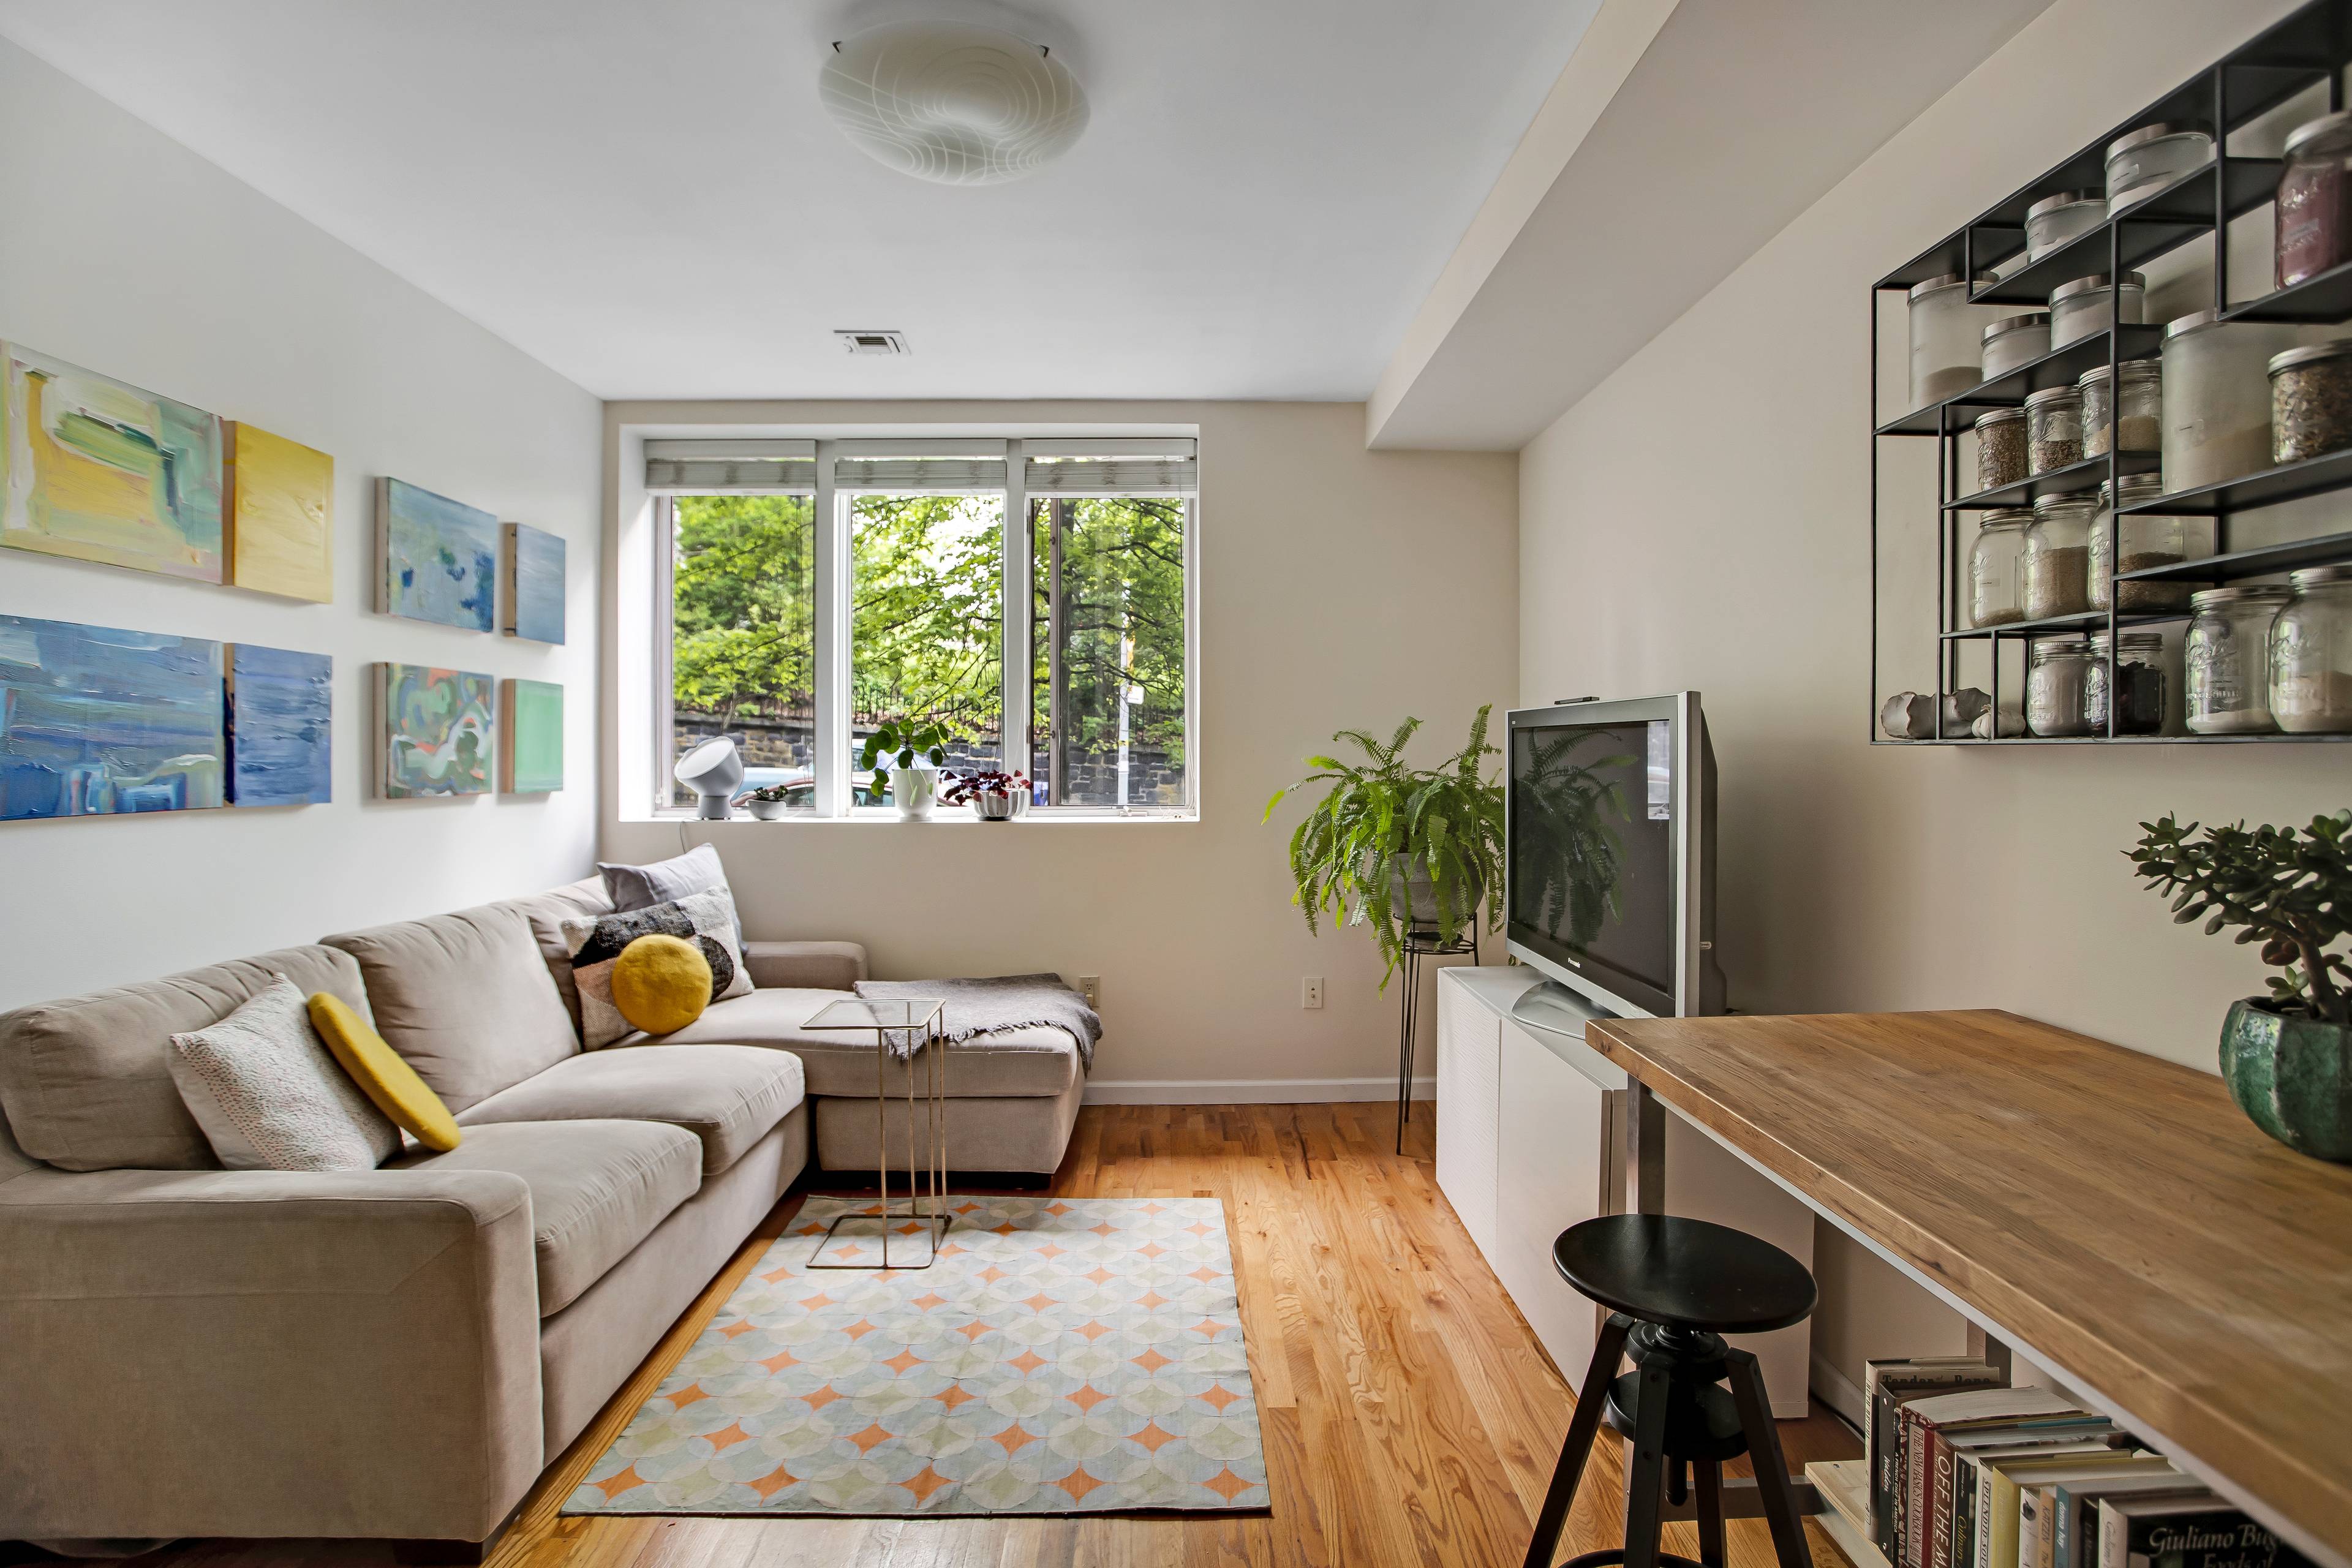 Located on the most picturesque block in Greenwood Heights, this duplex with an expansive, 420 square feet private yard is the townhouse alternative you've been looking for !